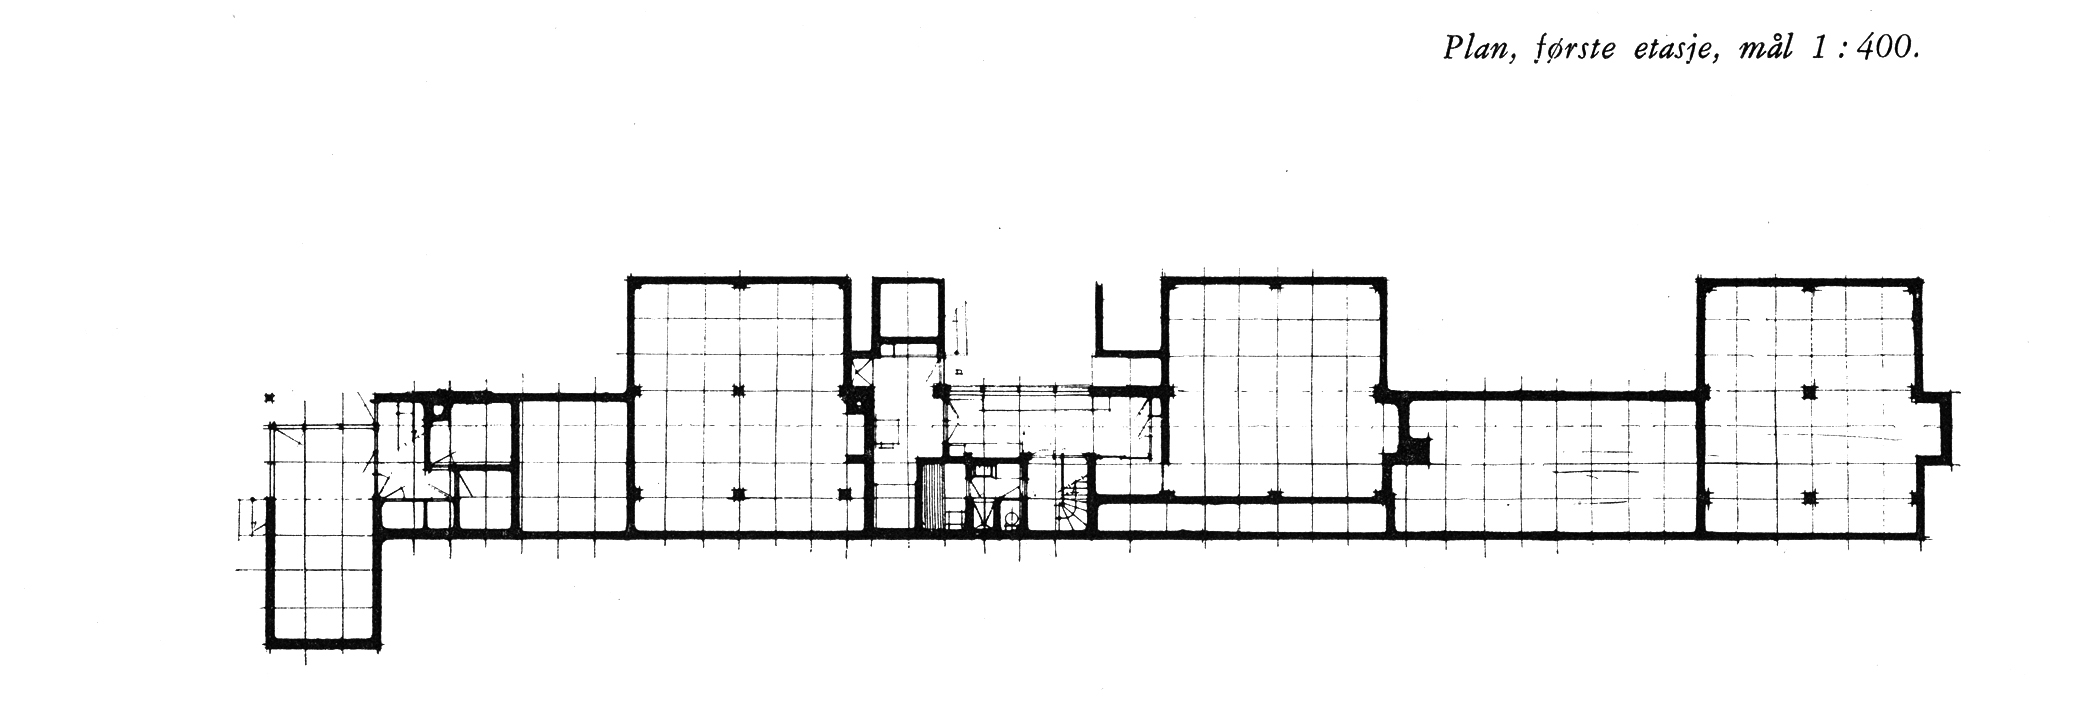 Plan showing the three houses at Planetveien. Note that Korsmo removed the central steel column from the living room of his central unit. As published in _Byggekunst_, n.7 (1955).